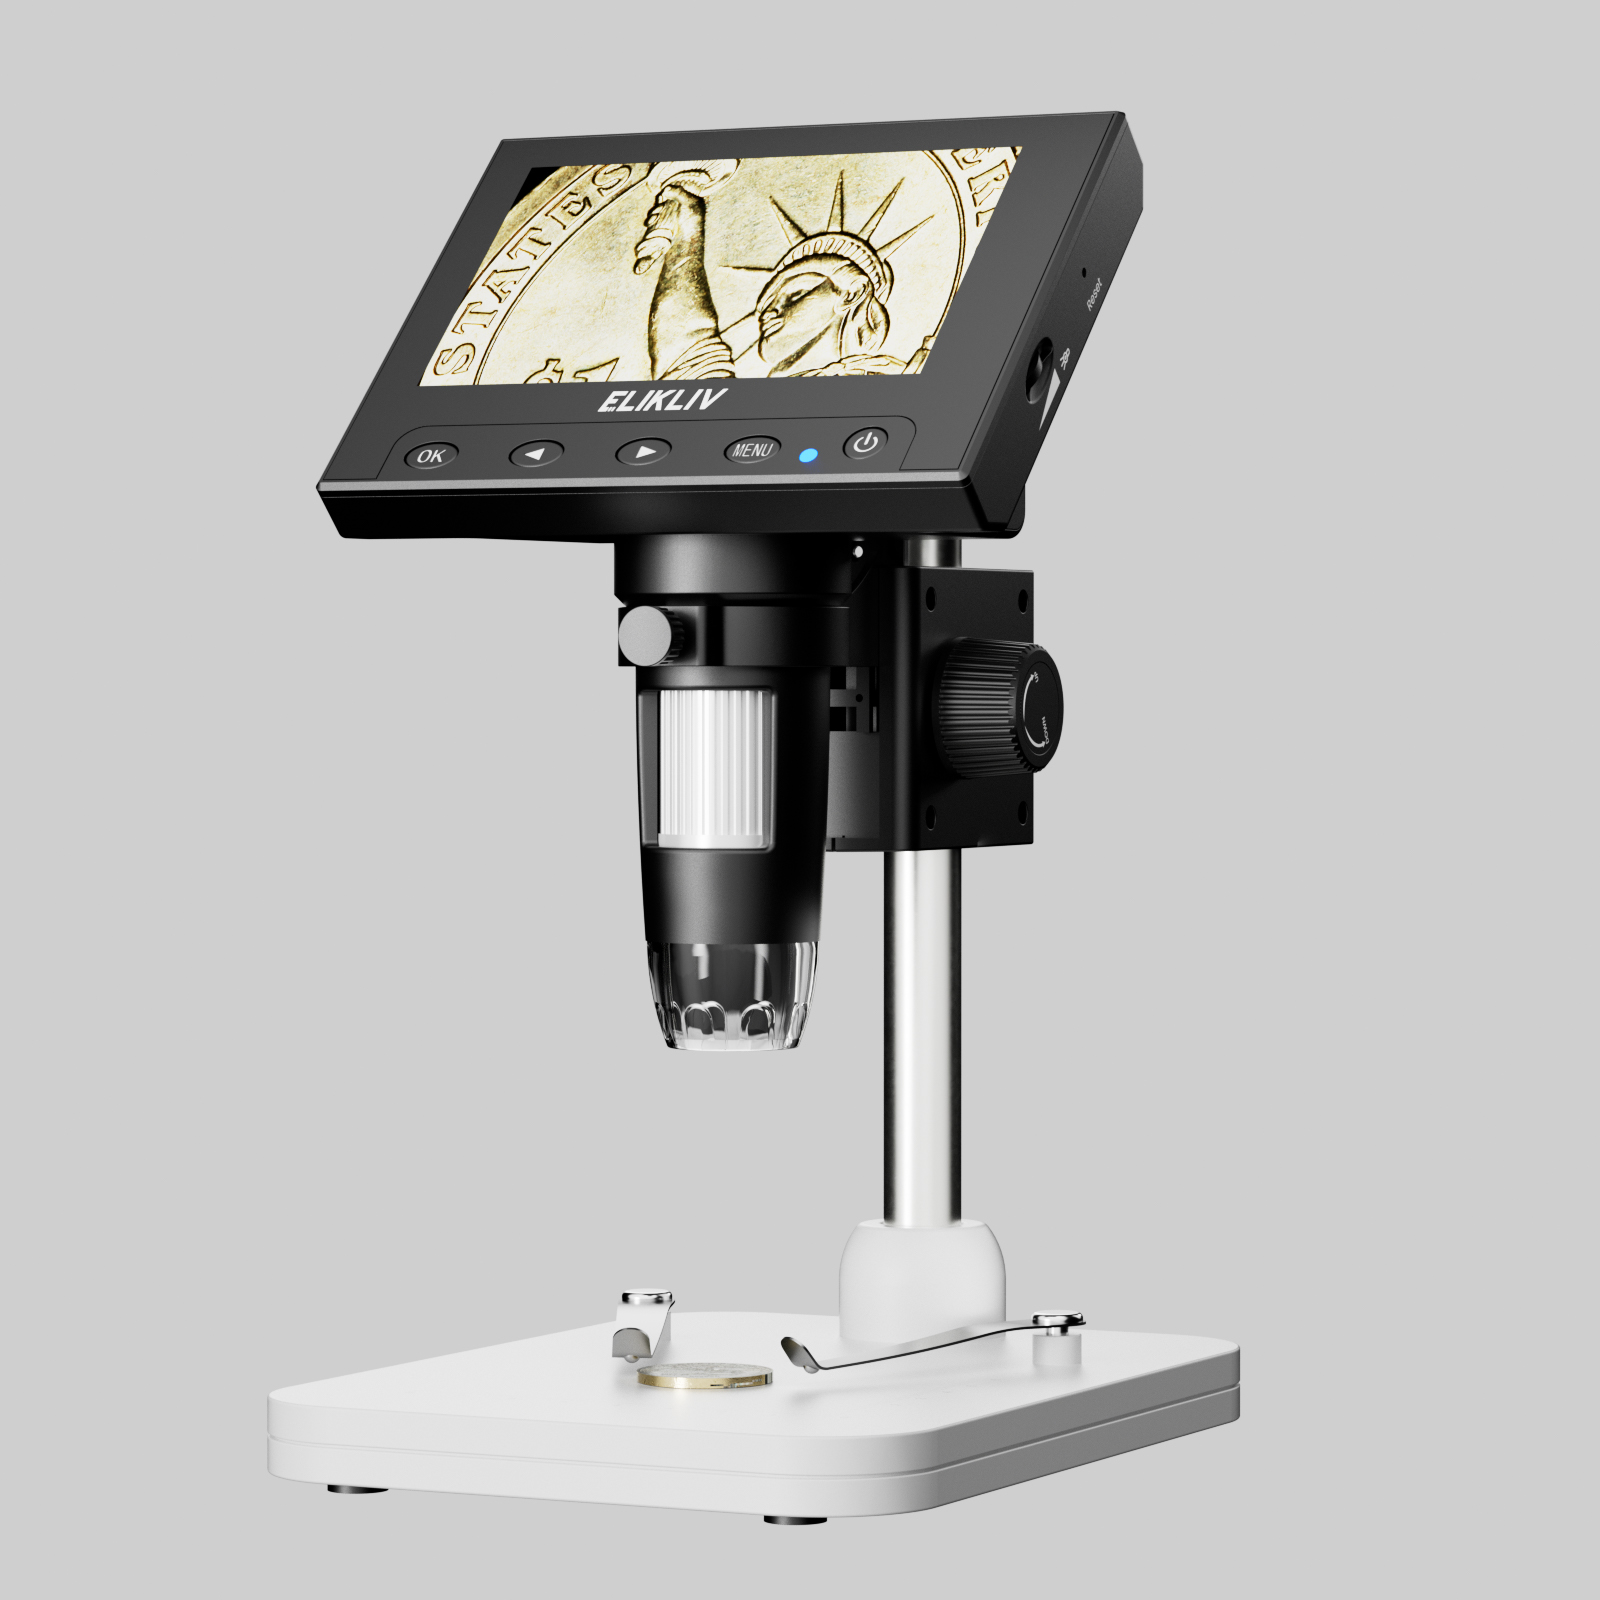 3 Lens 7'' LCD Digital Microscope 1000X LINKMICRO LM246 Error Coin Microscope Adults Full Coin View, Stem Science Microscope Kit Kids Student, Photo